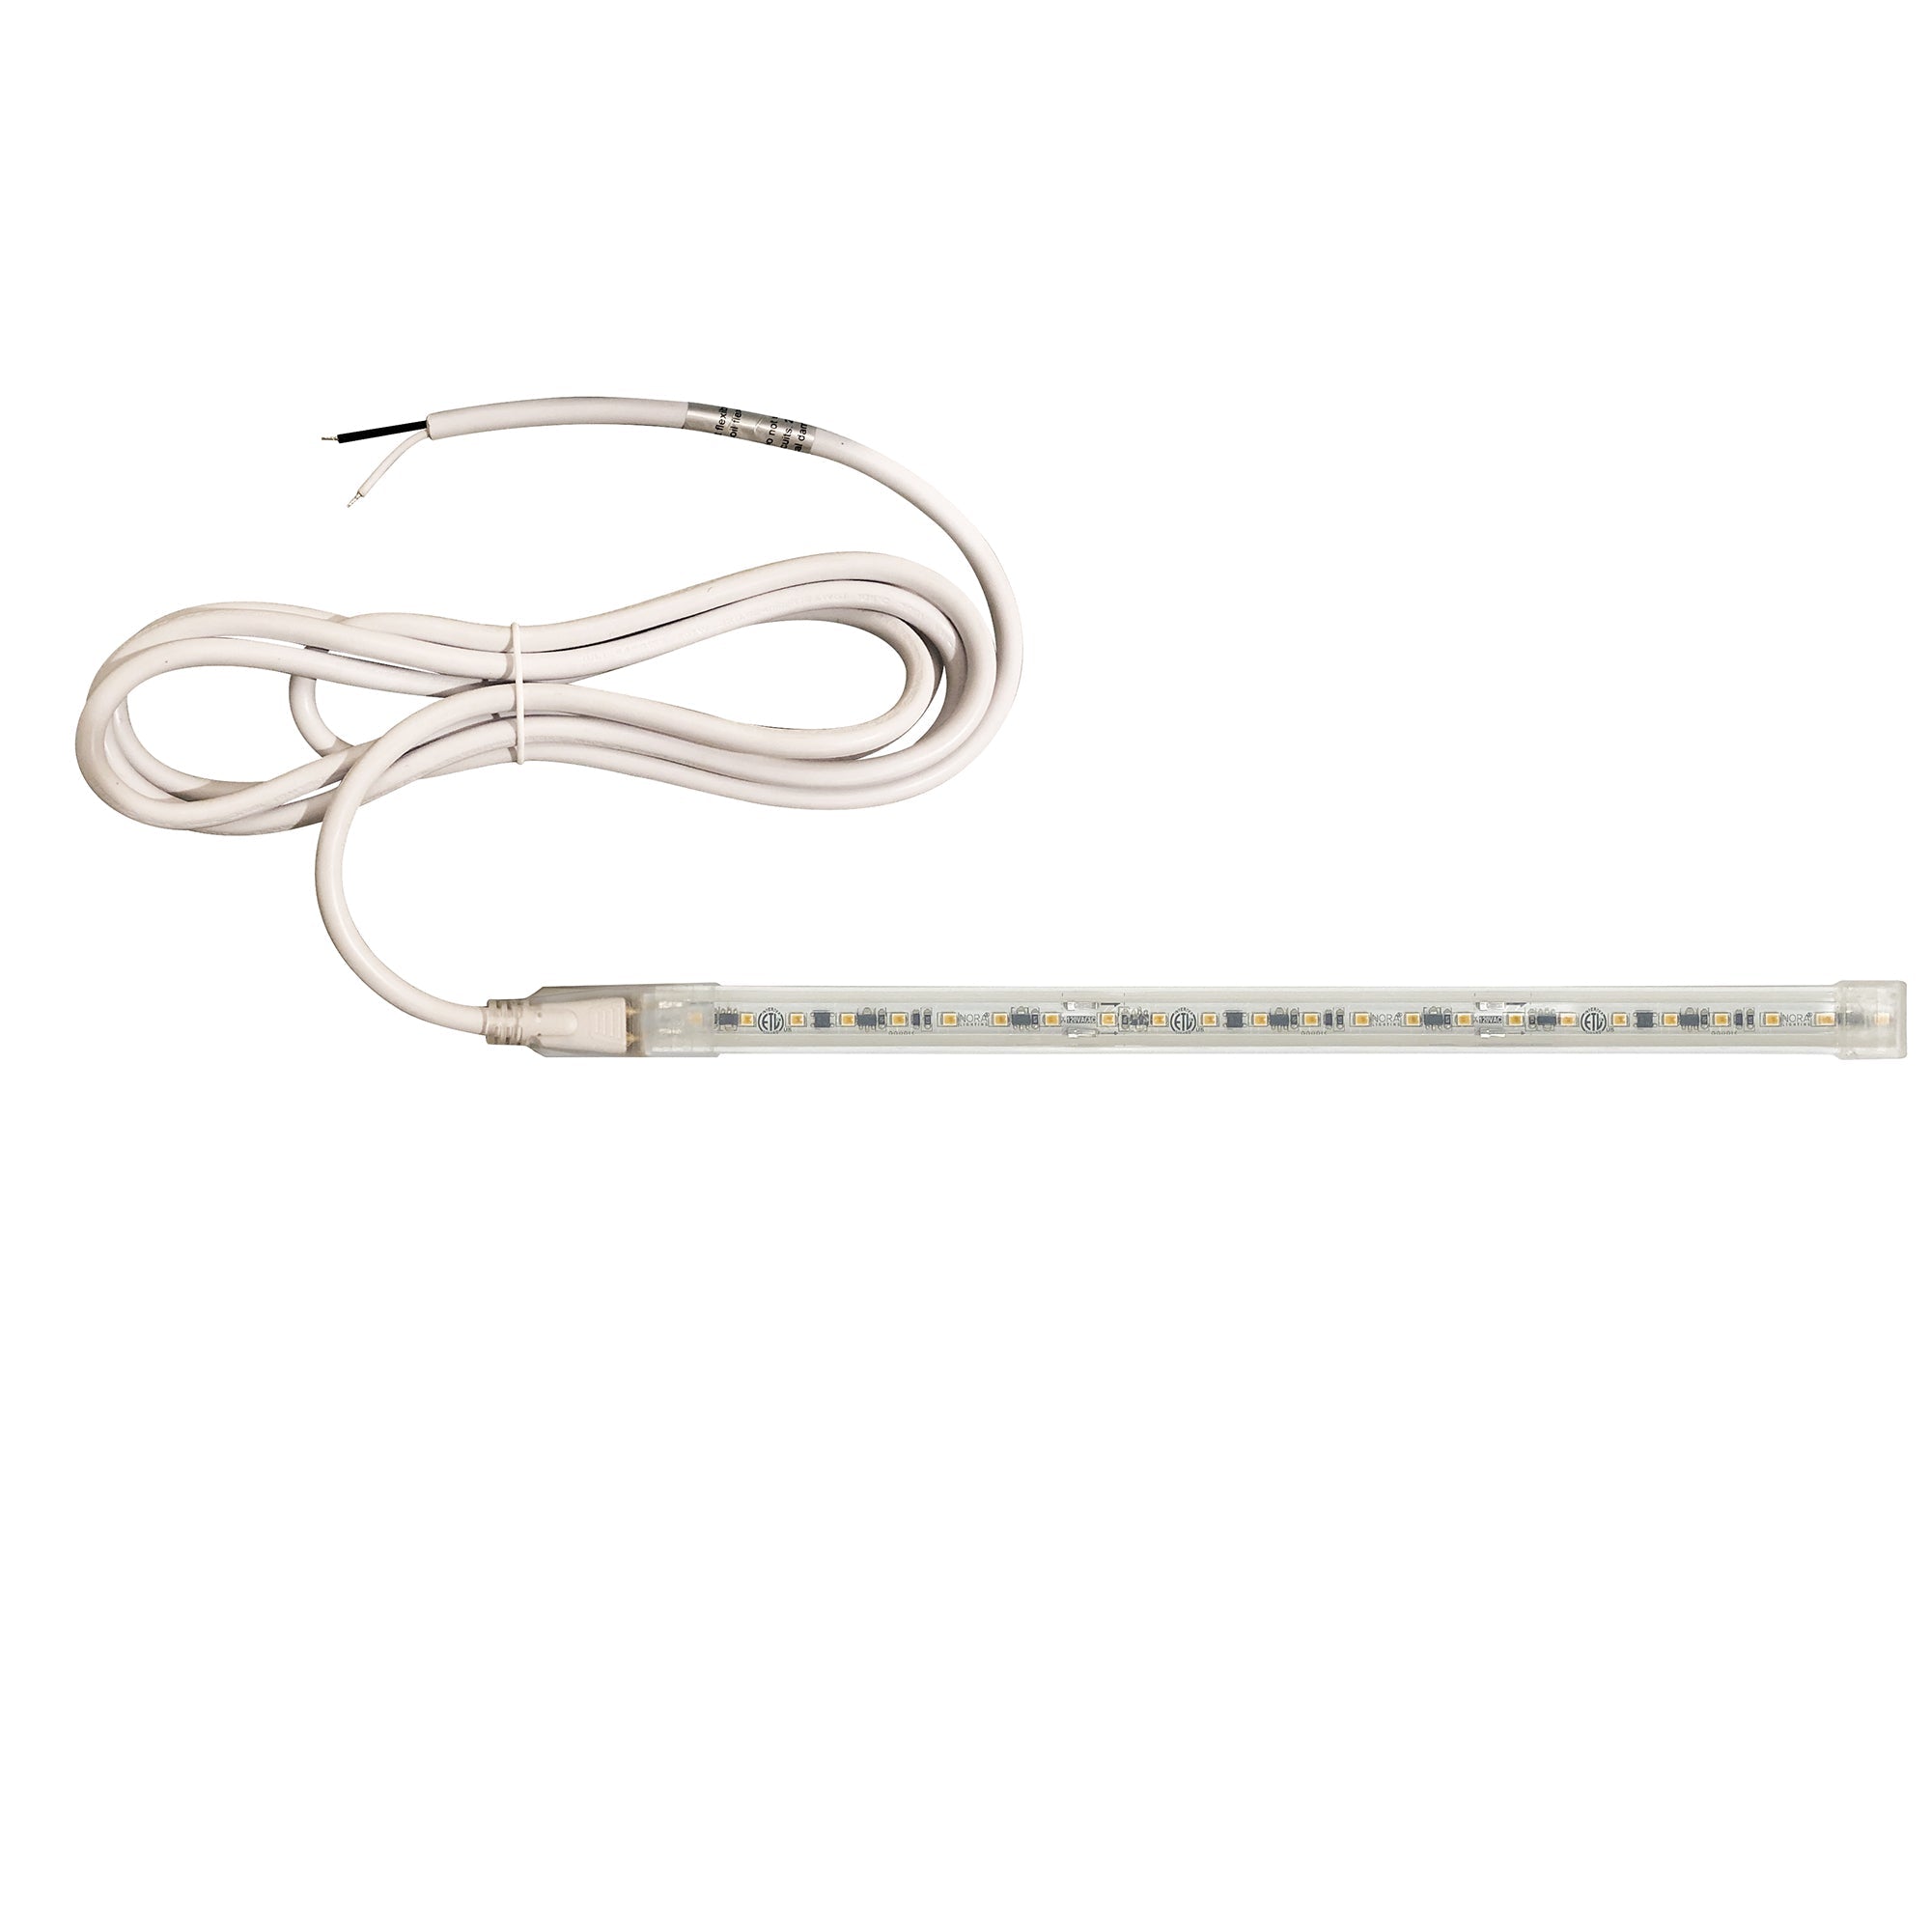 Nora Lighting NUTP13-W114-8-12-930/HW - Accent / Undercabinet - Custom Cut 114-ft, 8-in 120V Continuous LED Tape Light, 330lm / 3.6W per foot, 3000K, w/ Mounting Clips and 8' Hardwired Power Cord